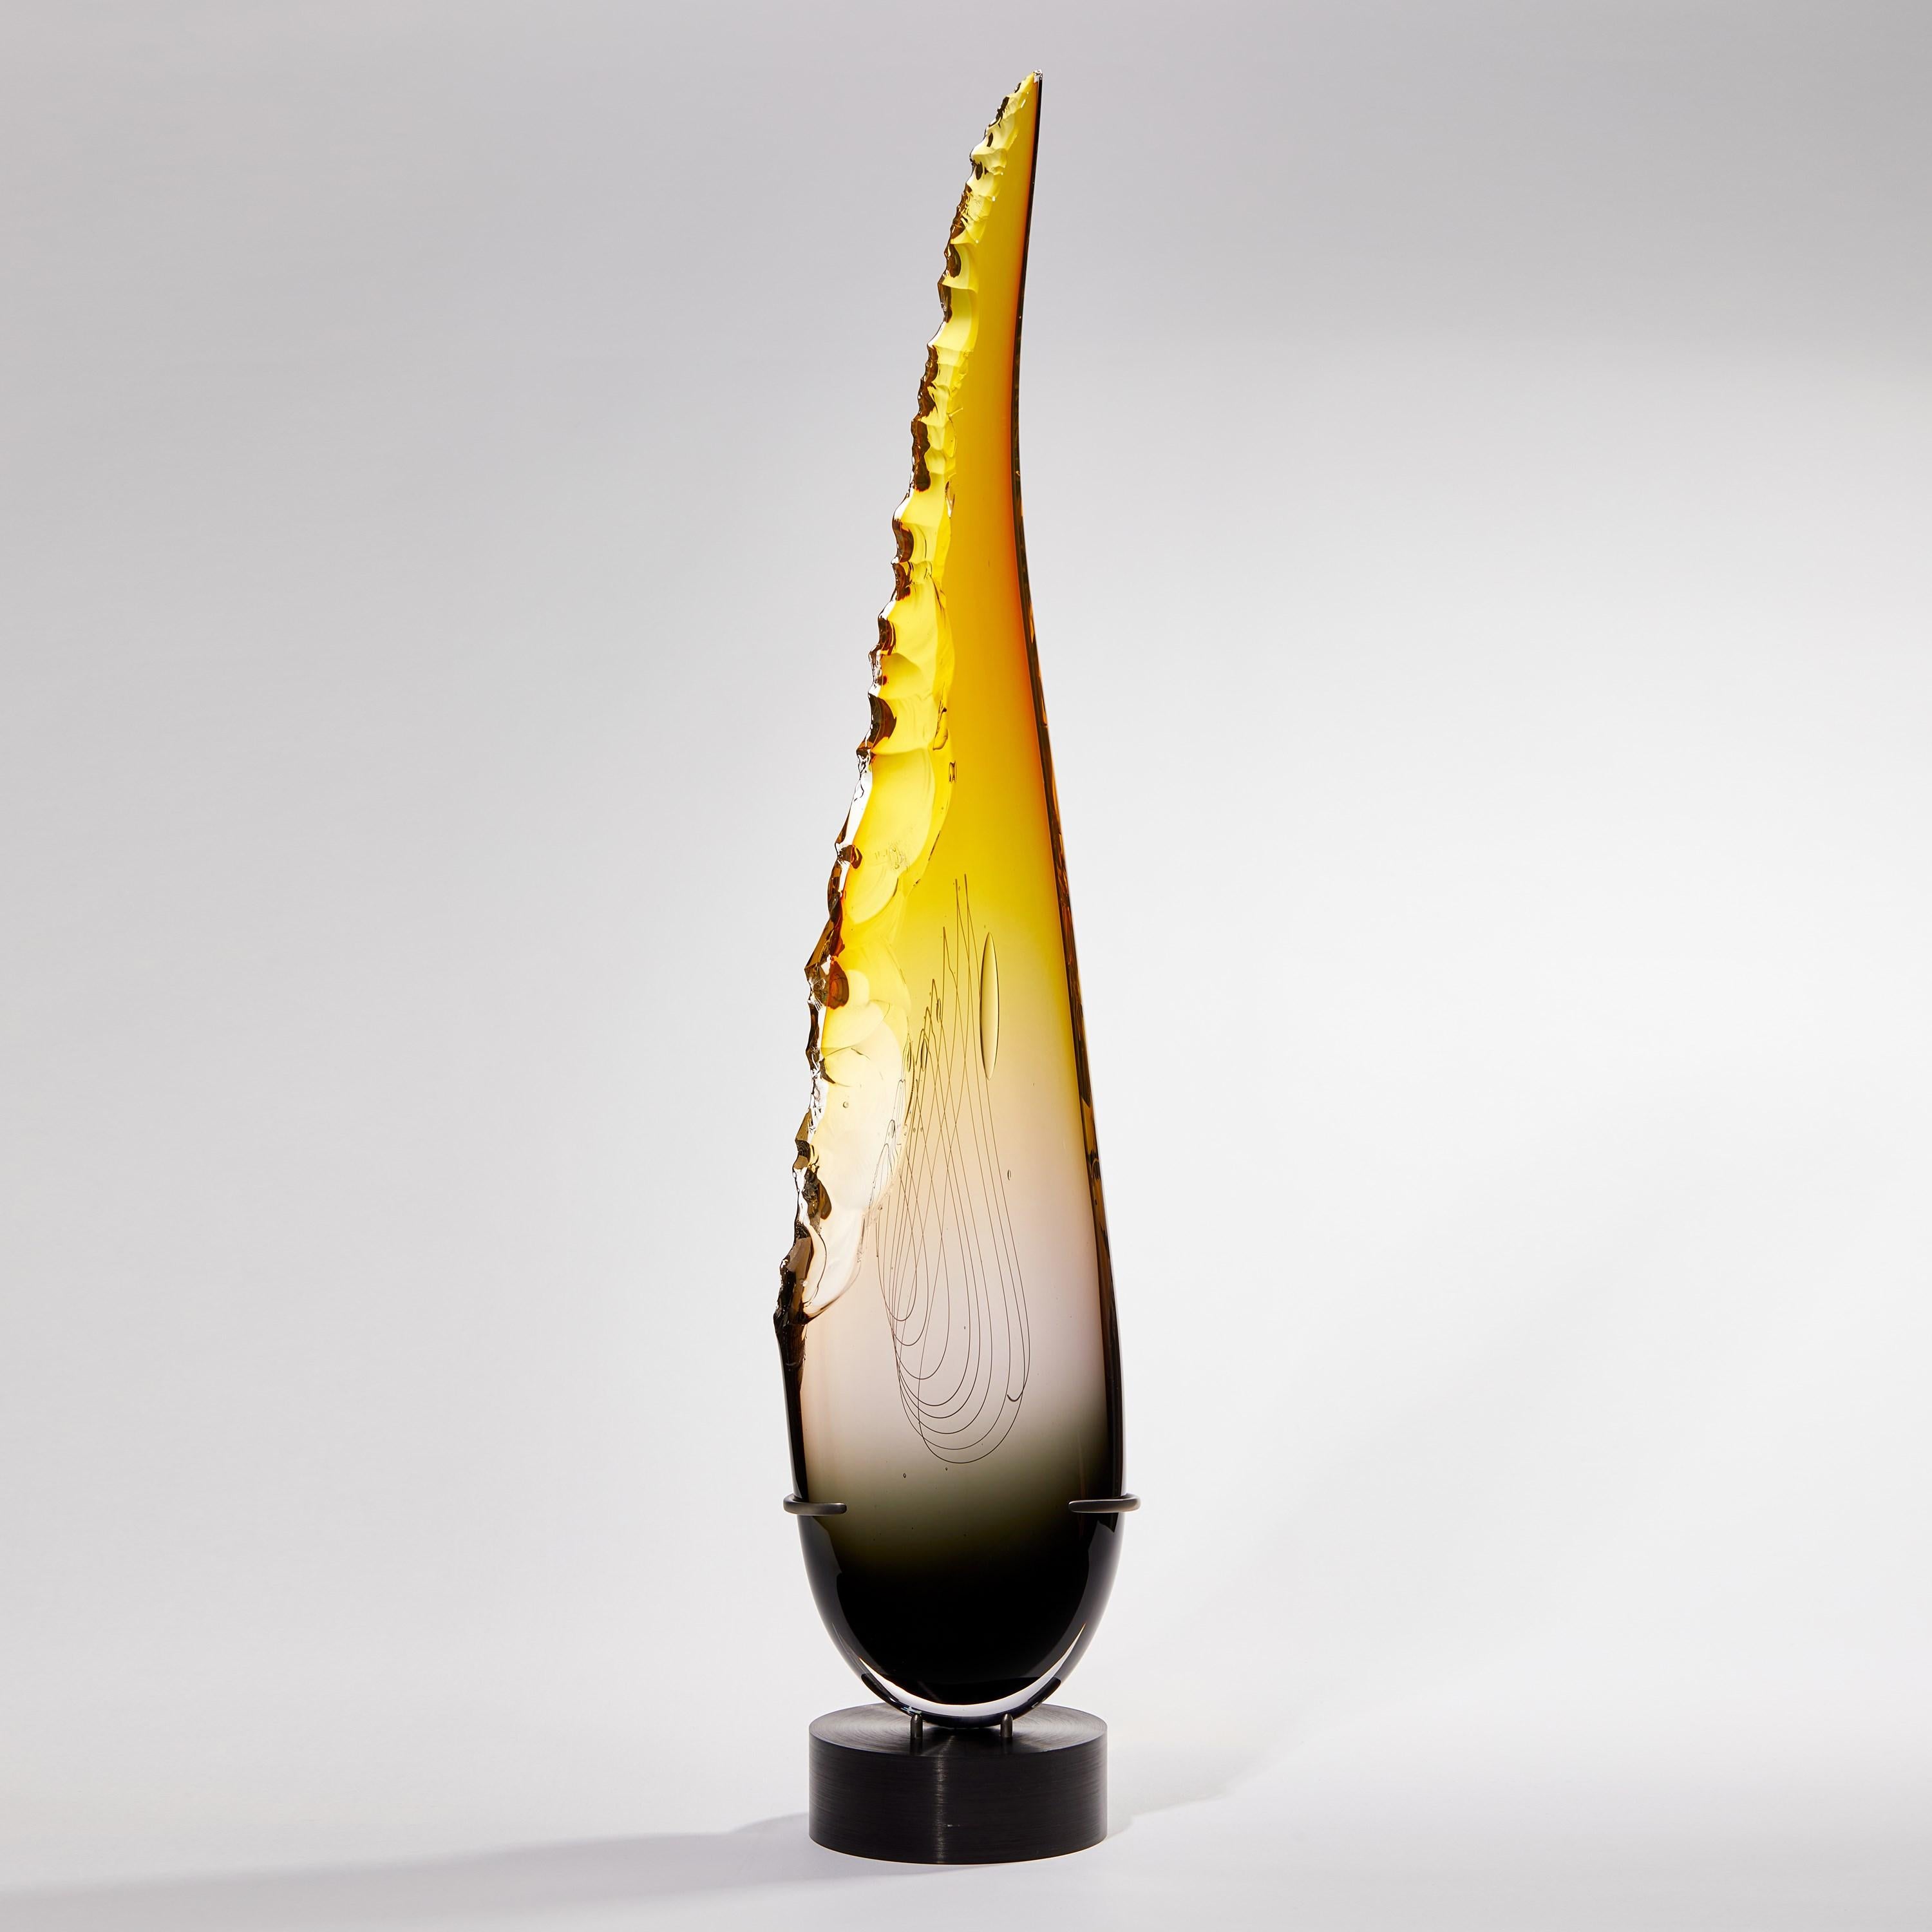 'Clovis in Grey to Topaz' is a unique tall glass sculpture by the British artist James Devereux.

Refinement and daring combine within this statuesque sculpture. Poised upon a museum-quality patinated steel base, the eye is drawn upwards, taken by